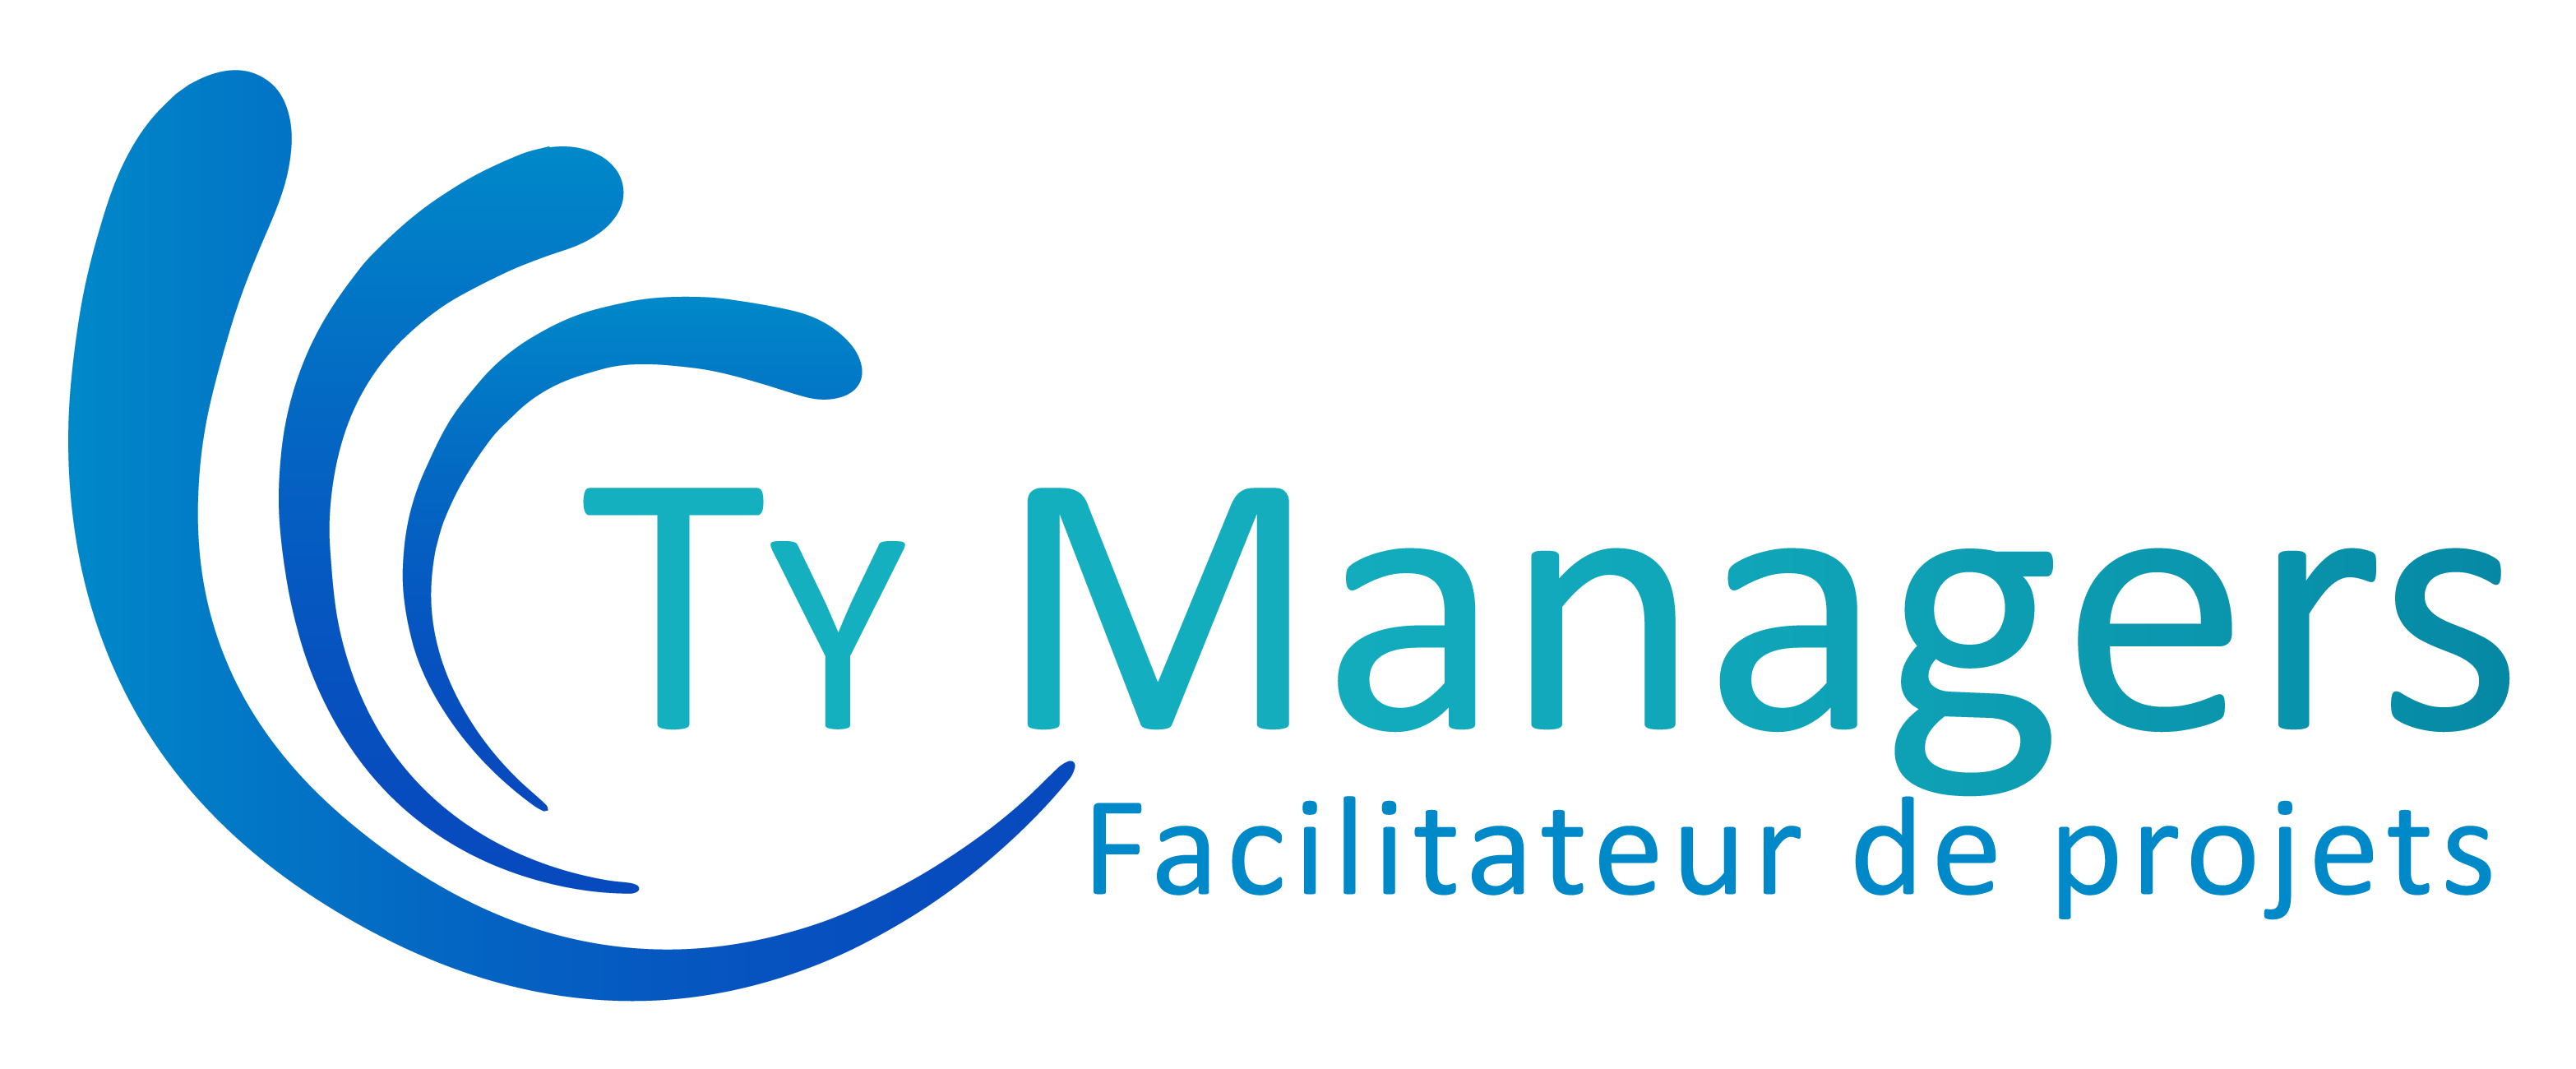 coaching management projets médico-social médiation Ty Managers